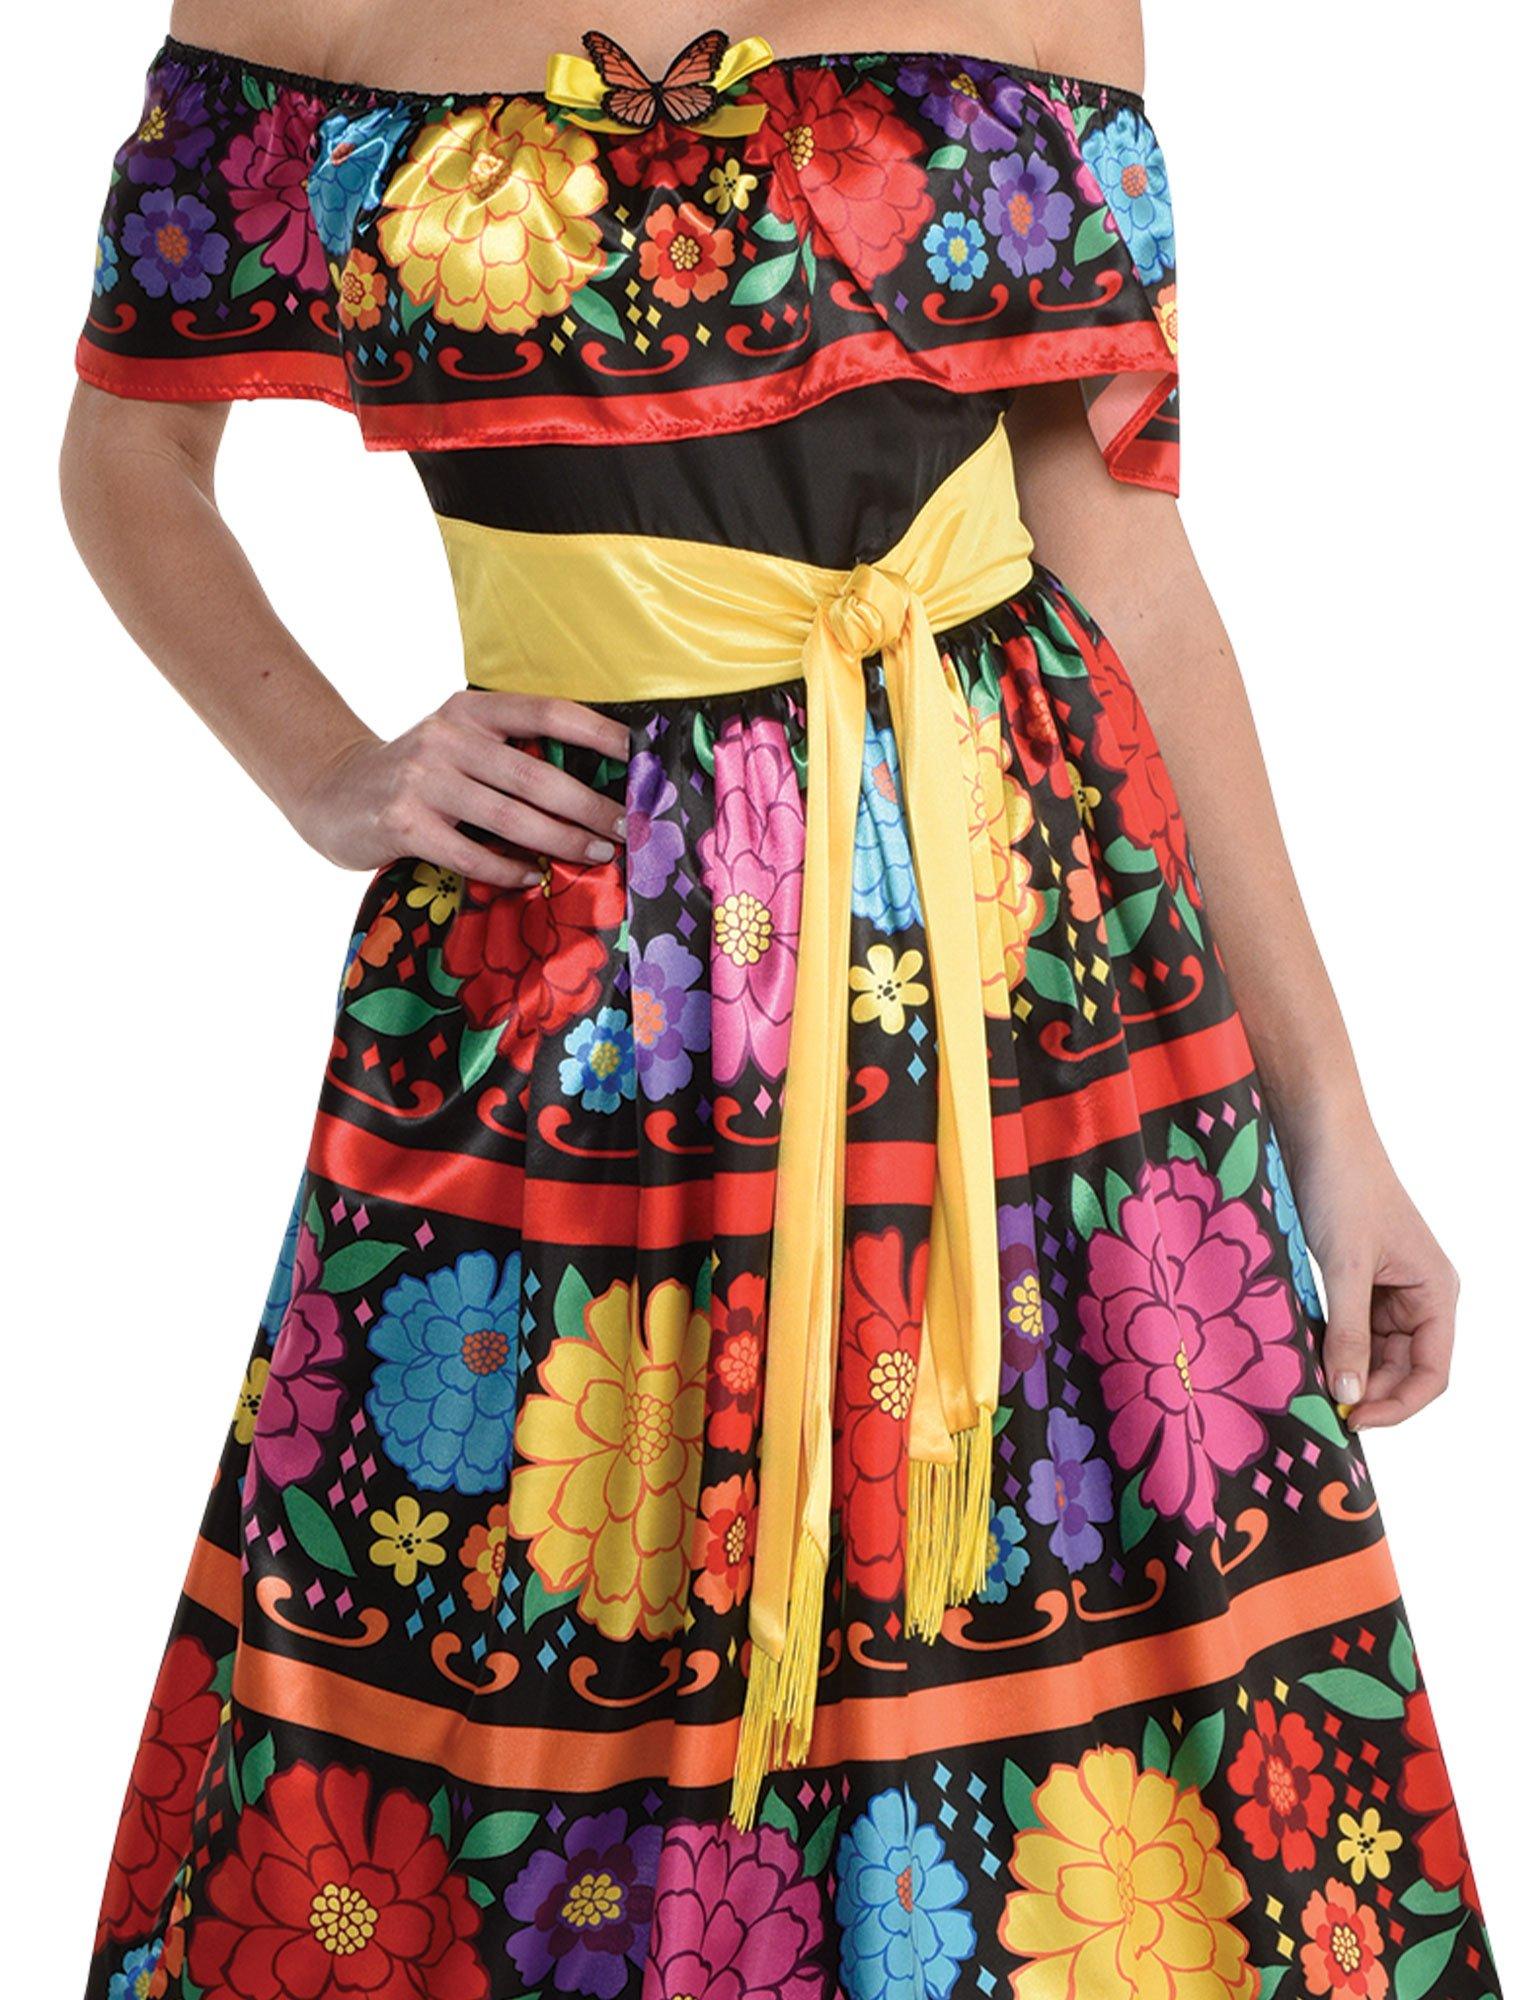 Sugar Skull Beauty Costume for Adults - Day of the Dead